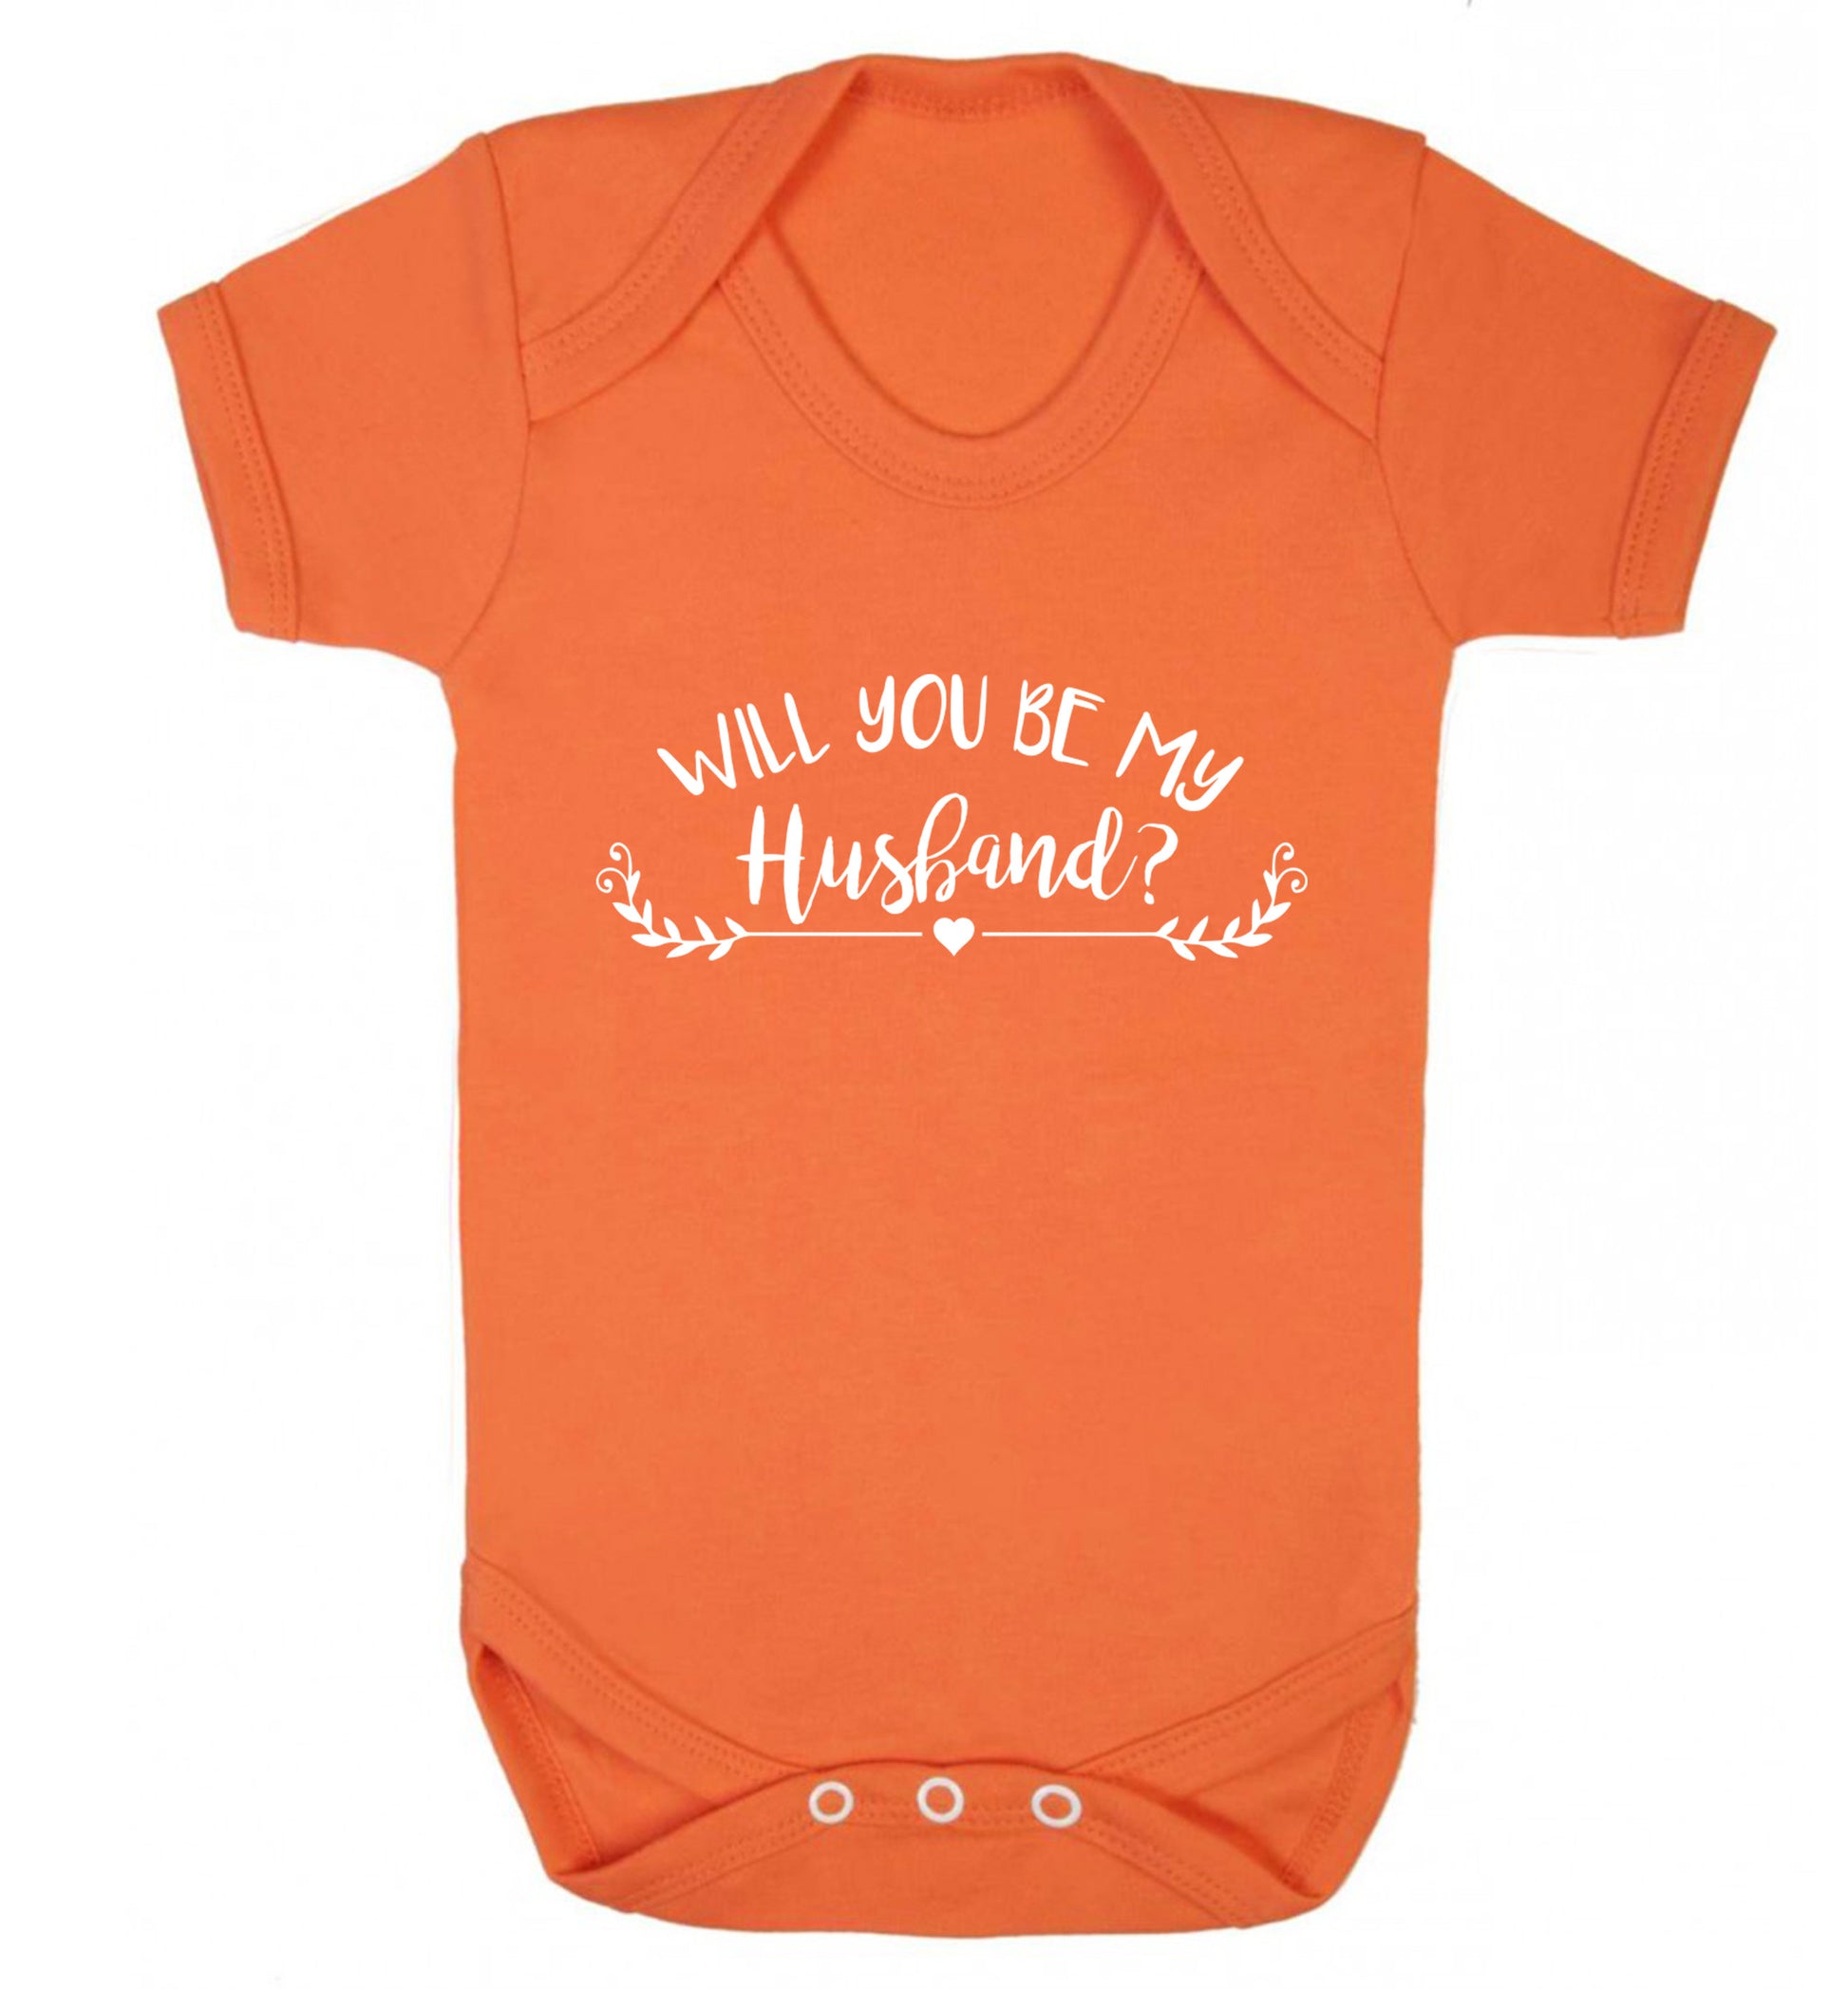 Will you be my husband? Baby Vest orange 18-24 months